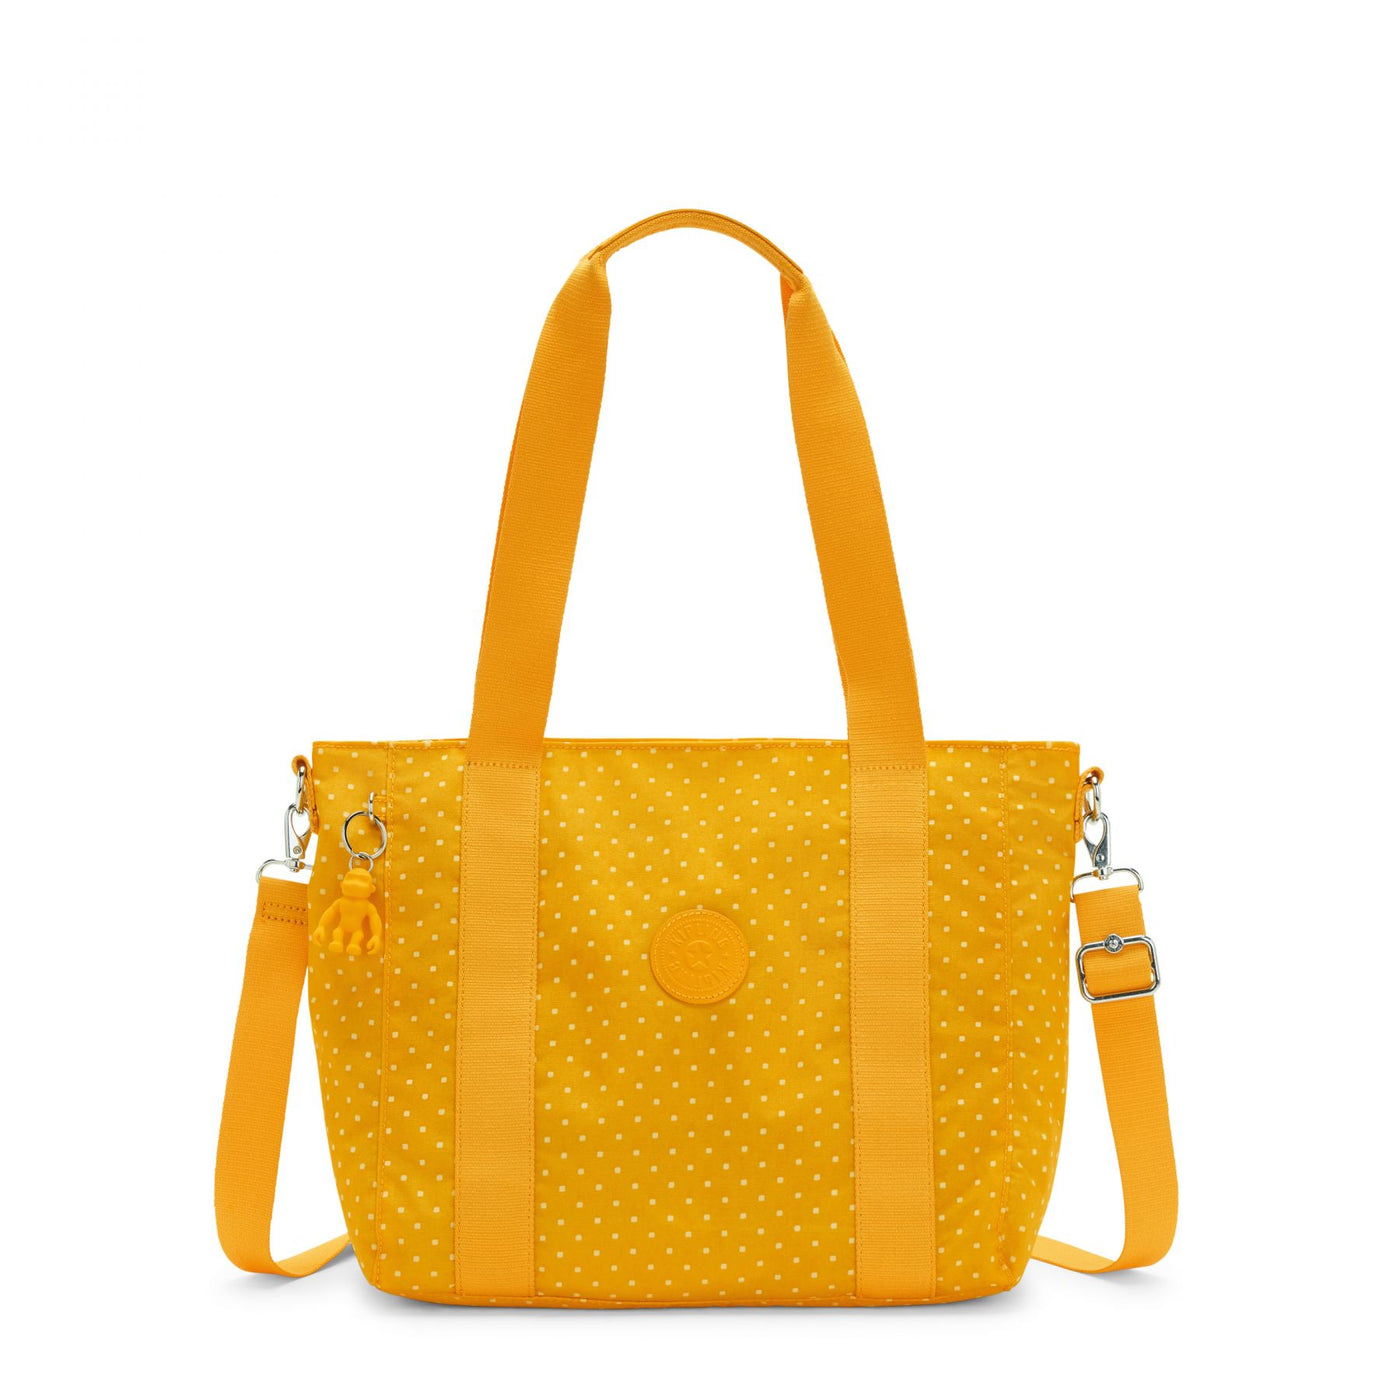 Shop The Latest Collection Of Kipling Asseni S-Small Tote (With Removable Shoulderstrap)-I4707 In Lebanon